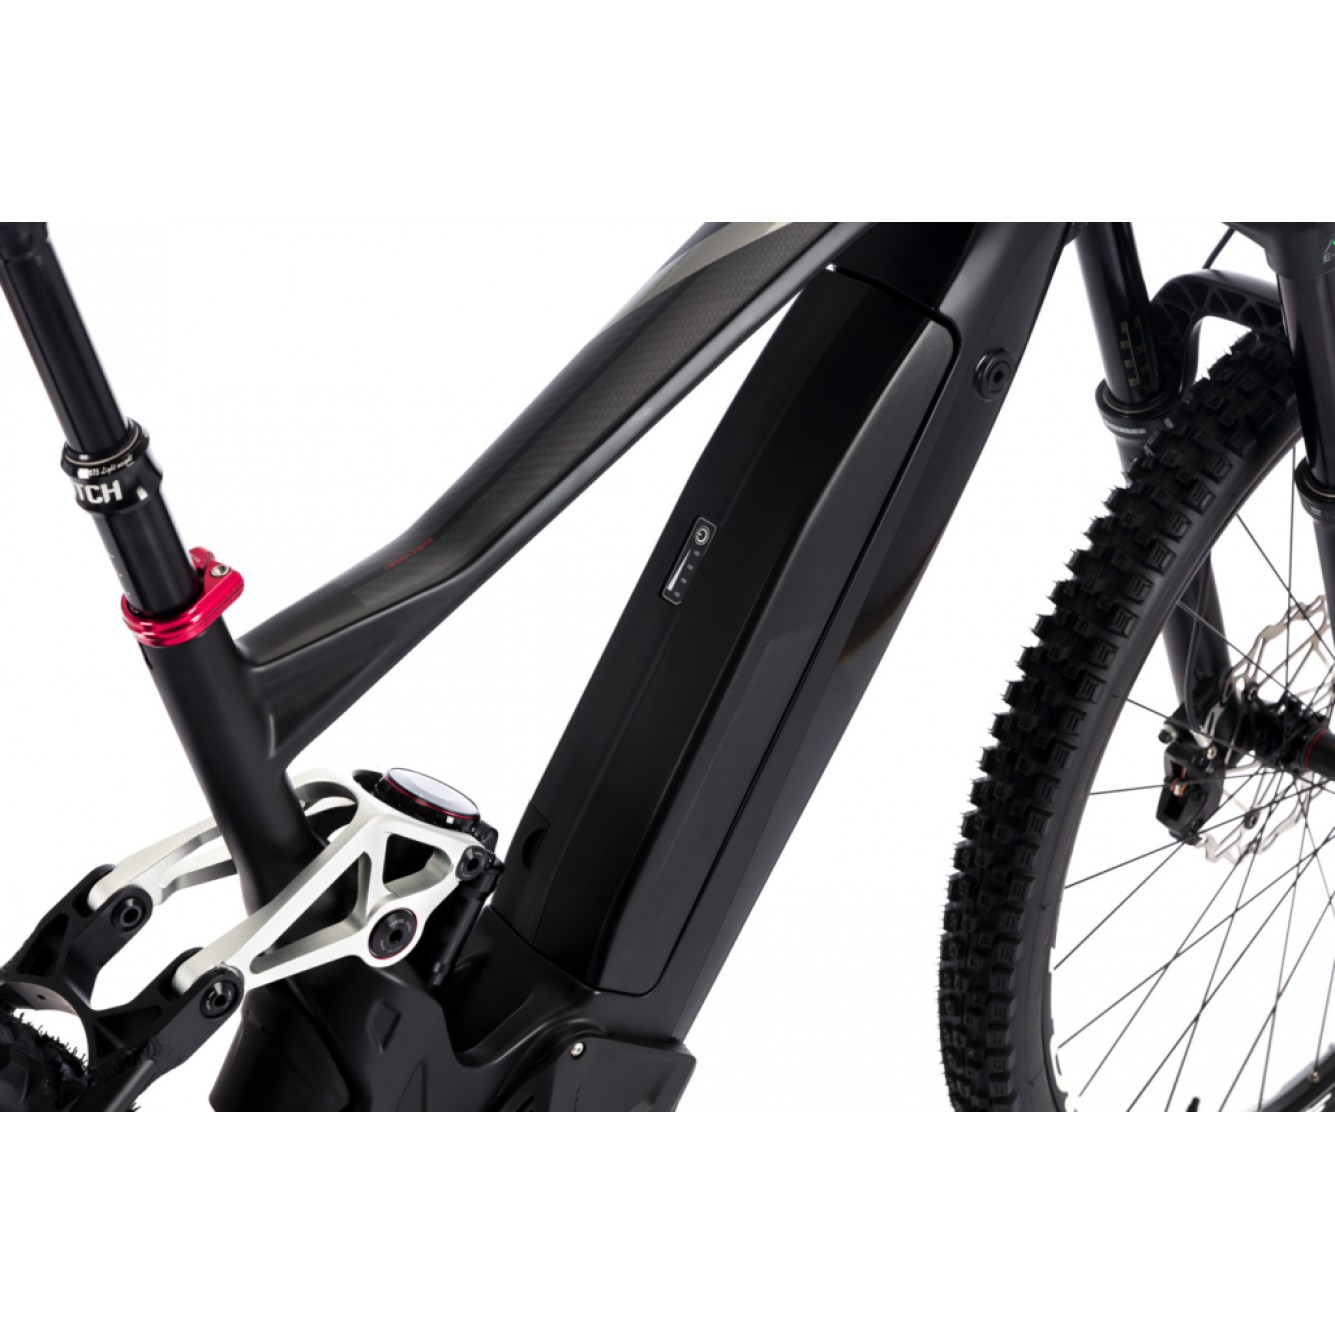 FANTIC | All Mountain - INTEGRA XMF 1.7 720 Wh CARBON